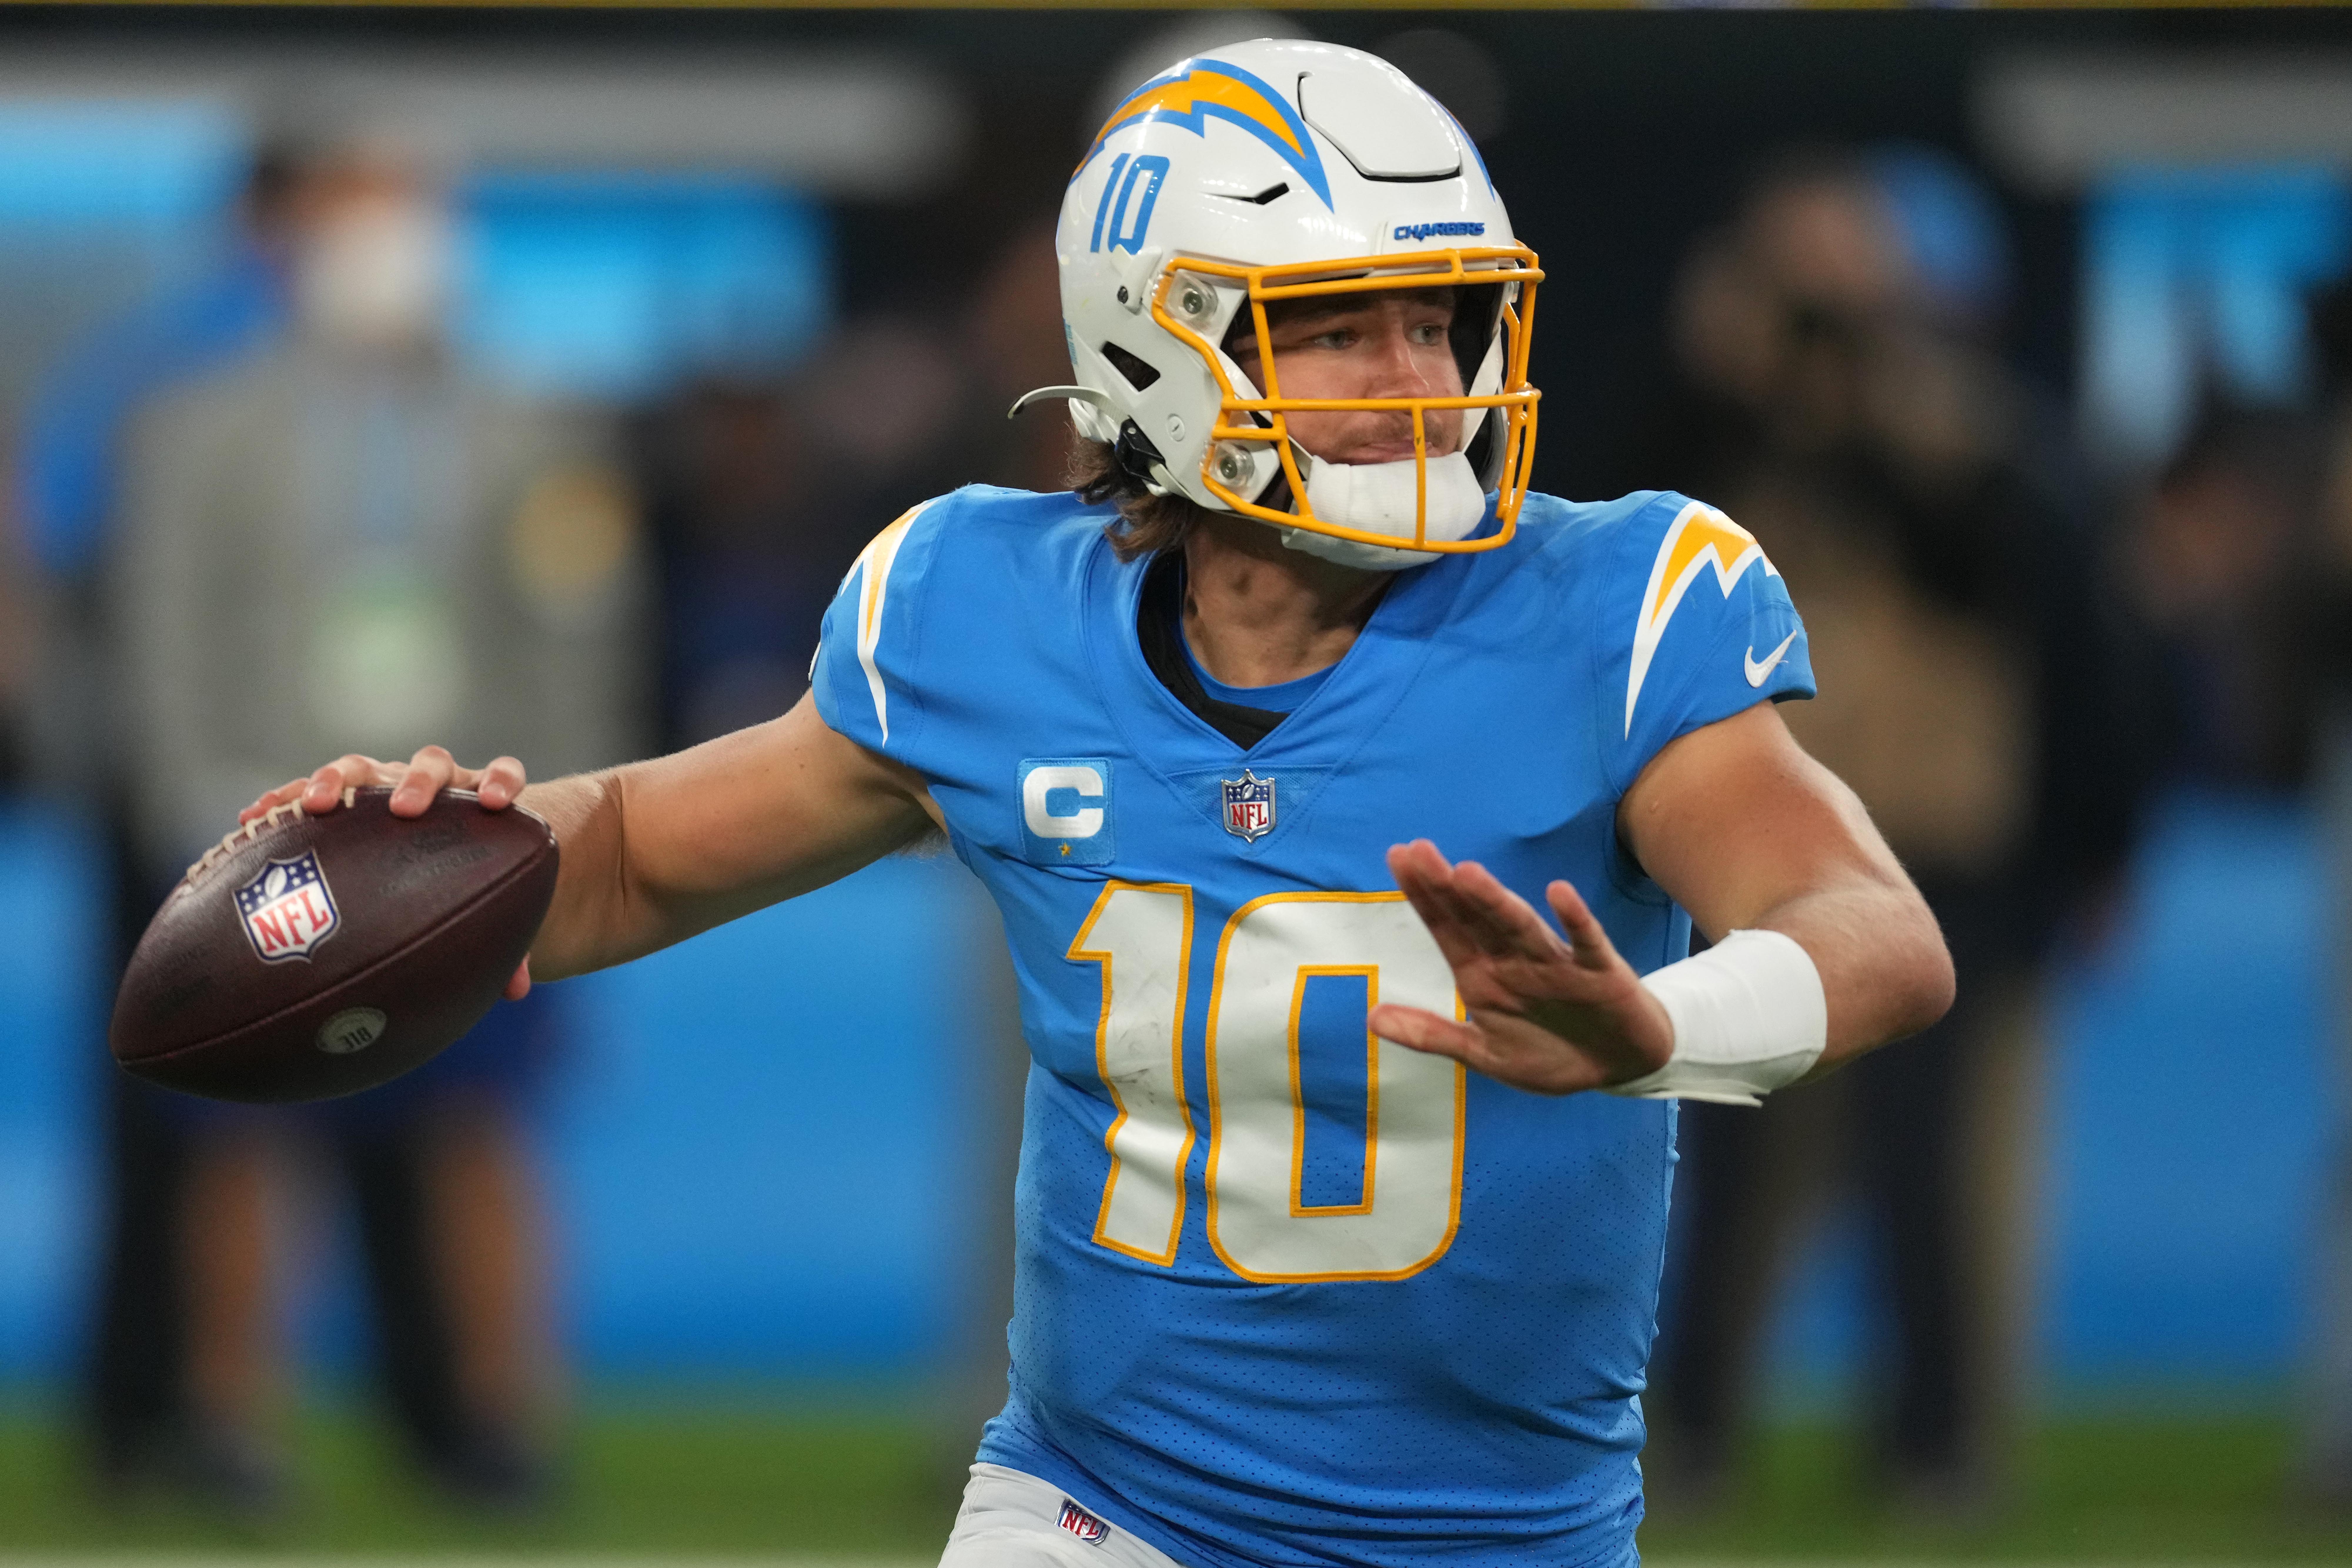 NFL: Kansas City Chiefs at Los Angeles Chargers